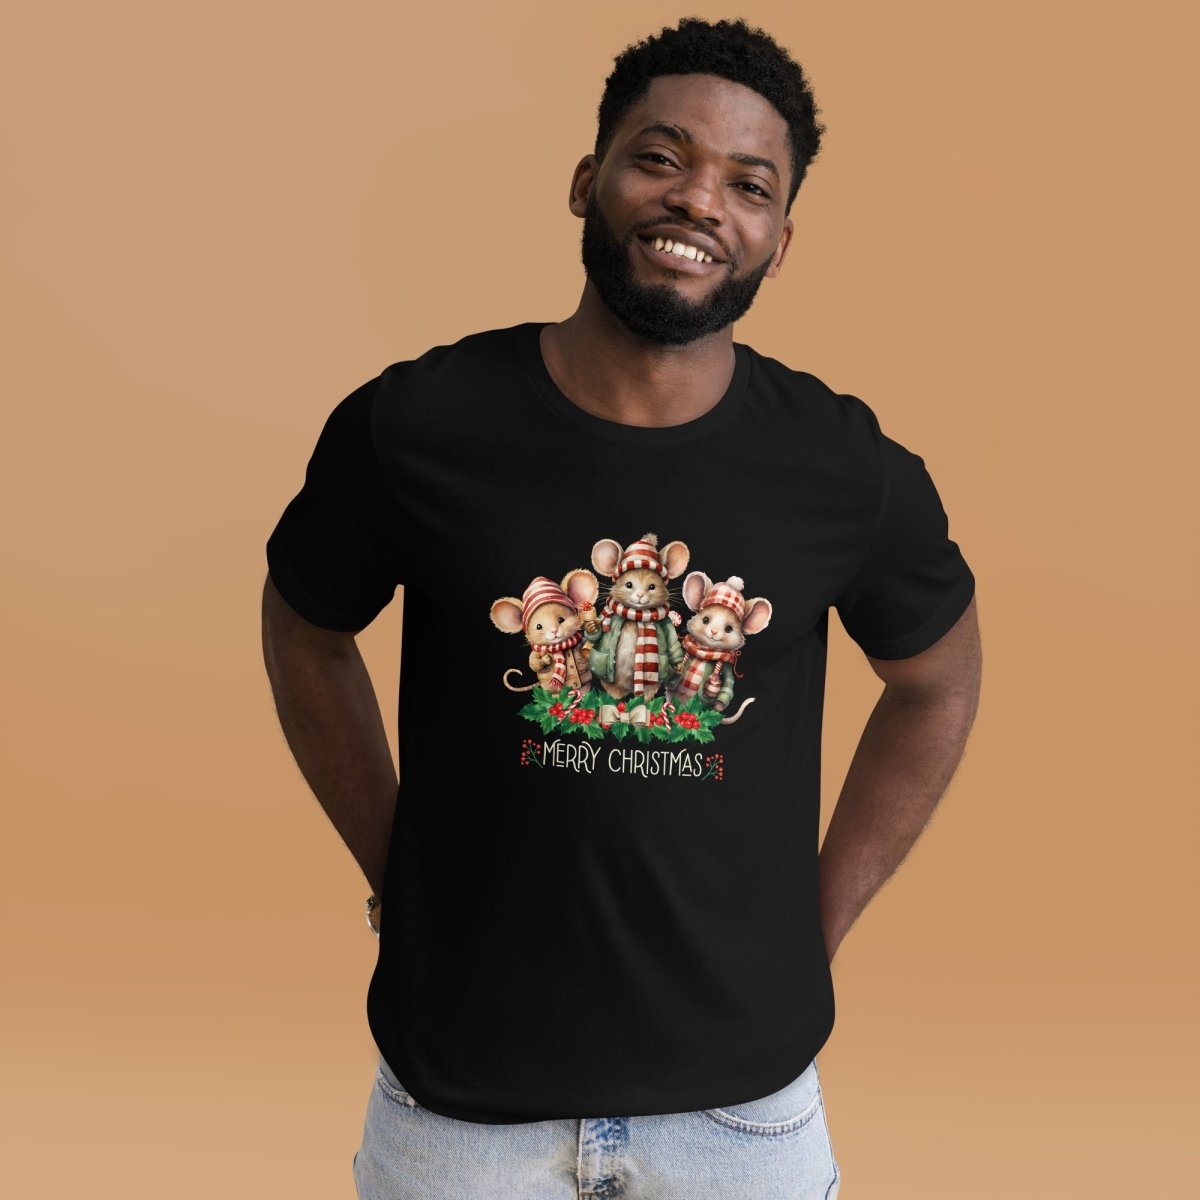 Christmas Mice T-Shirt - High Quality Festive Family Unisex T-Shirt, Family Reunion Tee, Holiday Shirt, Christmas Vacation Tee, Cute Mouse - Everything Pixel